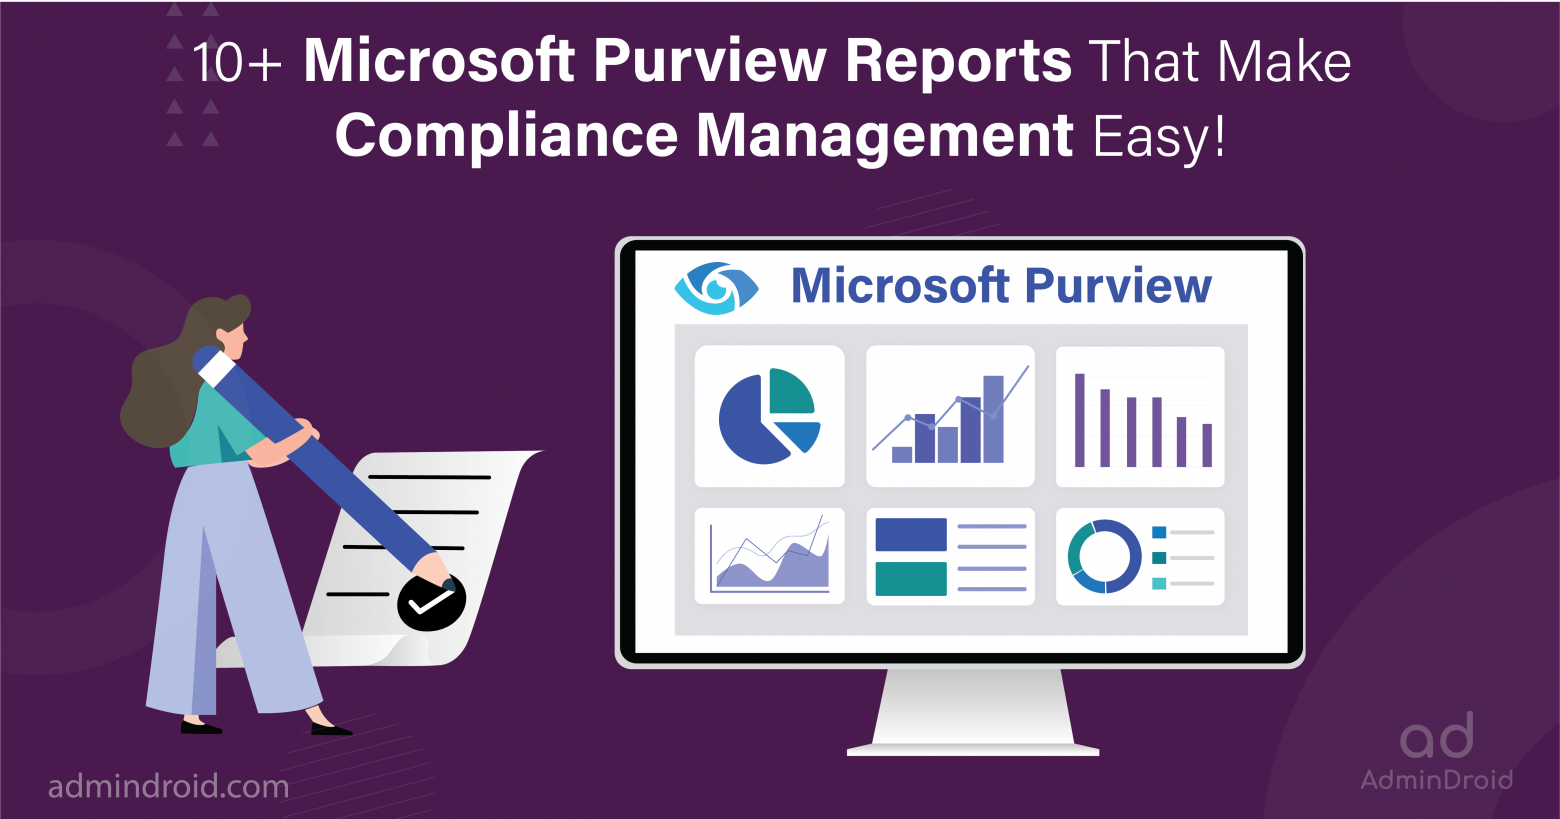 10+ Microsoft Purview Reports That Make Compliance Management Easy!